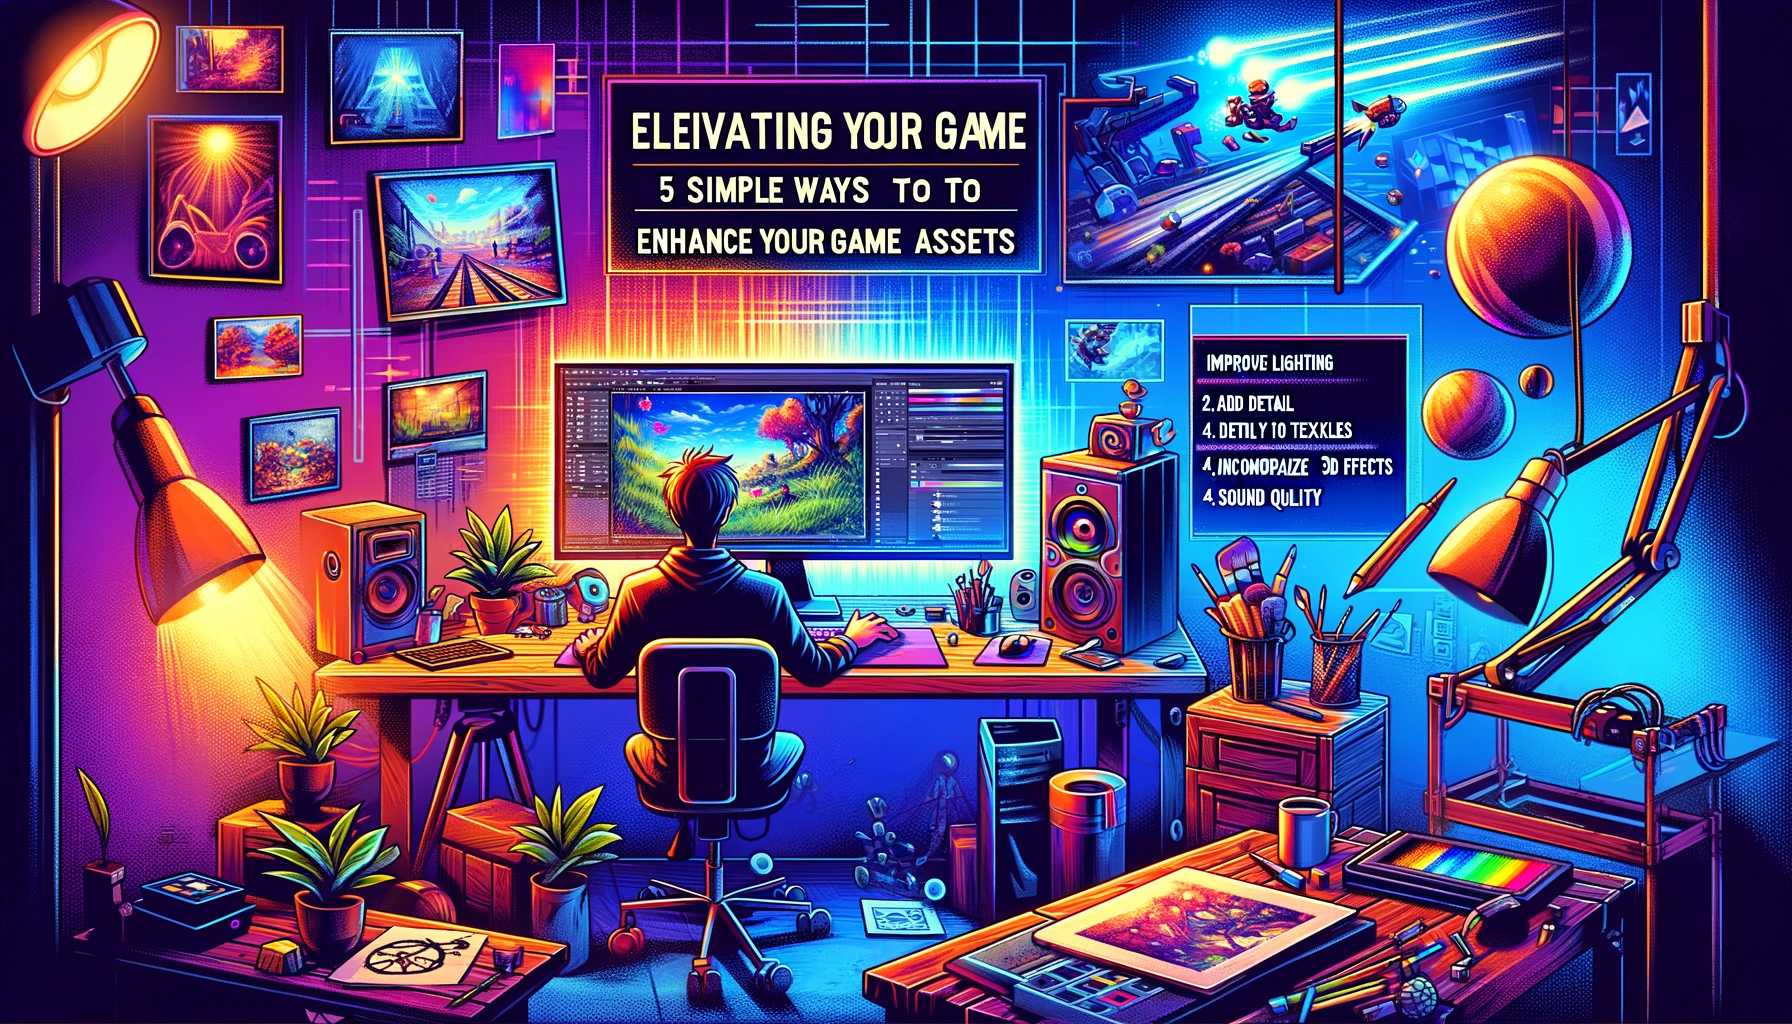 Elevating Your Game: 5 Simple Ways to Enhance Your Game Assets